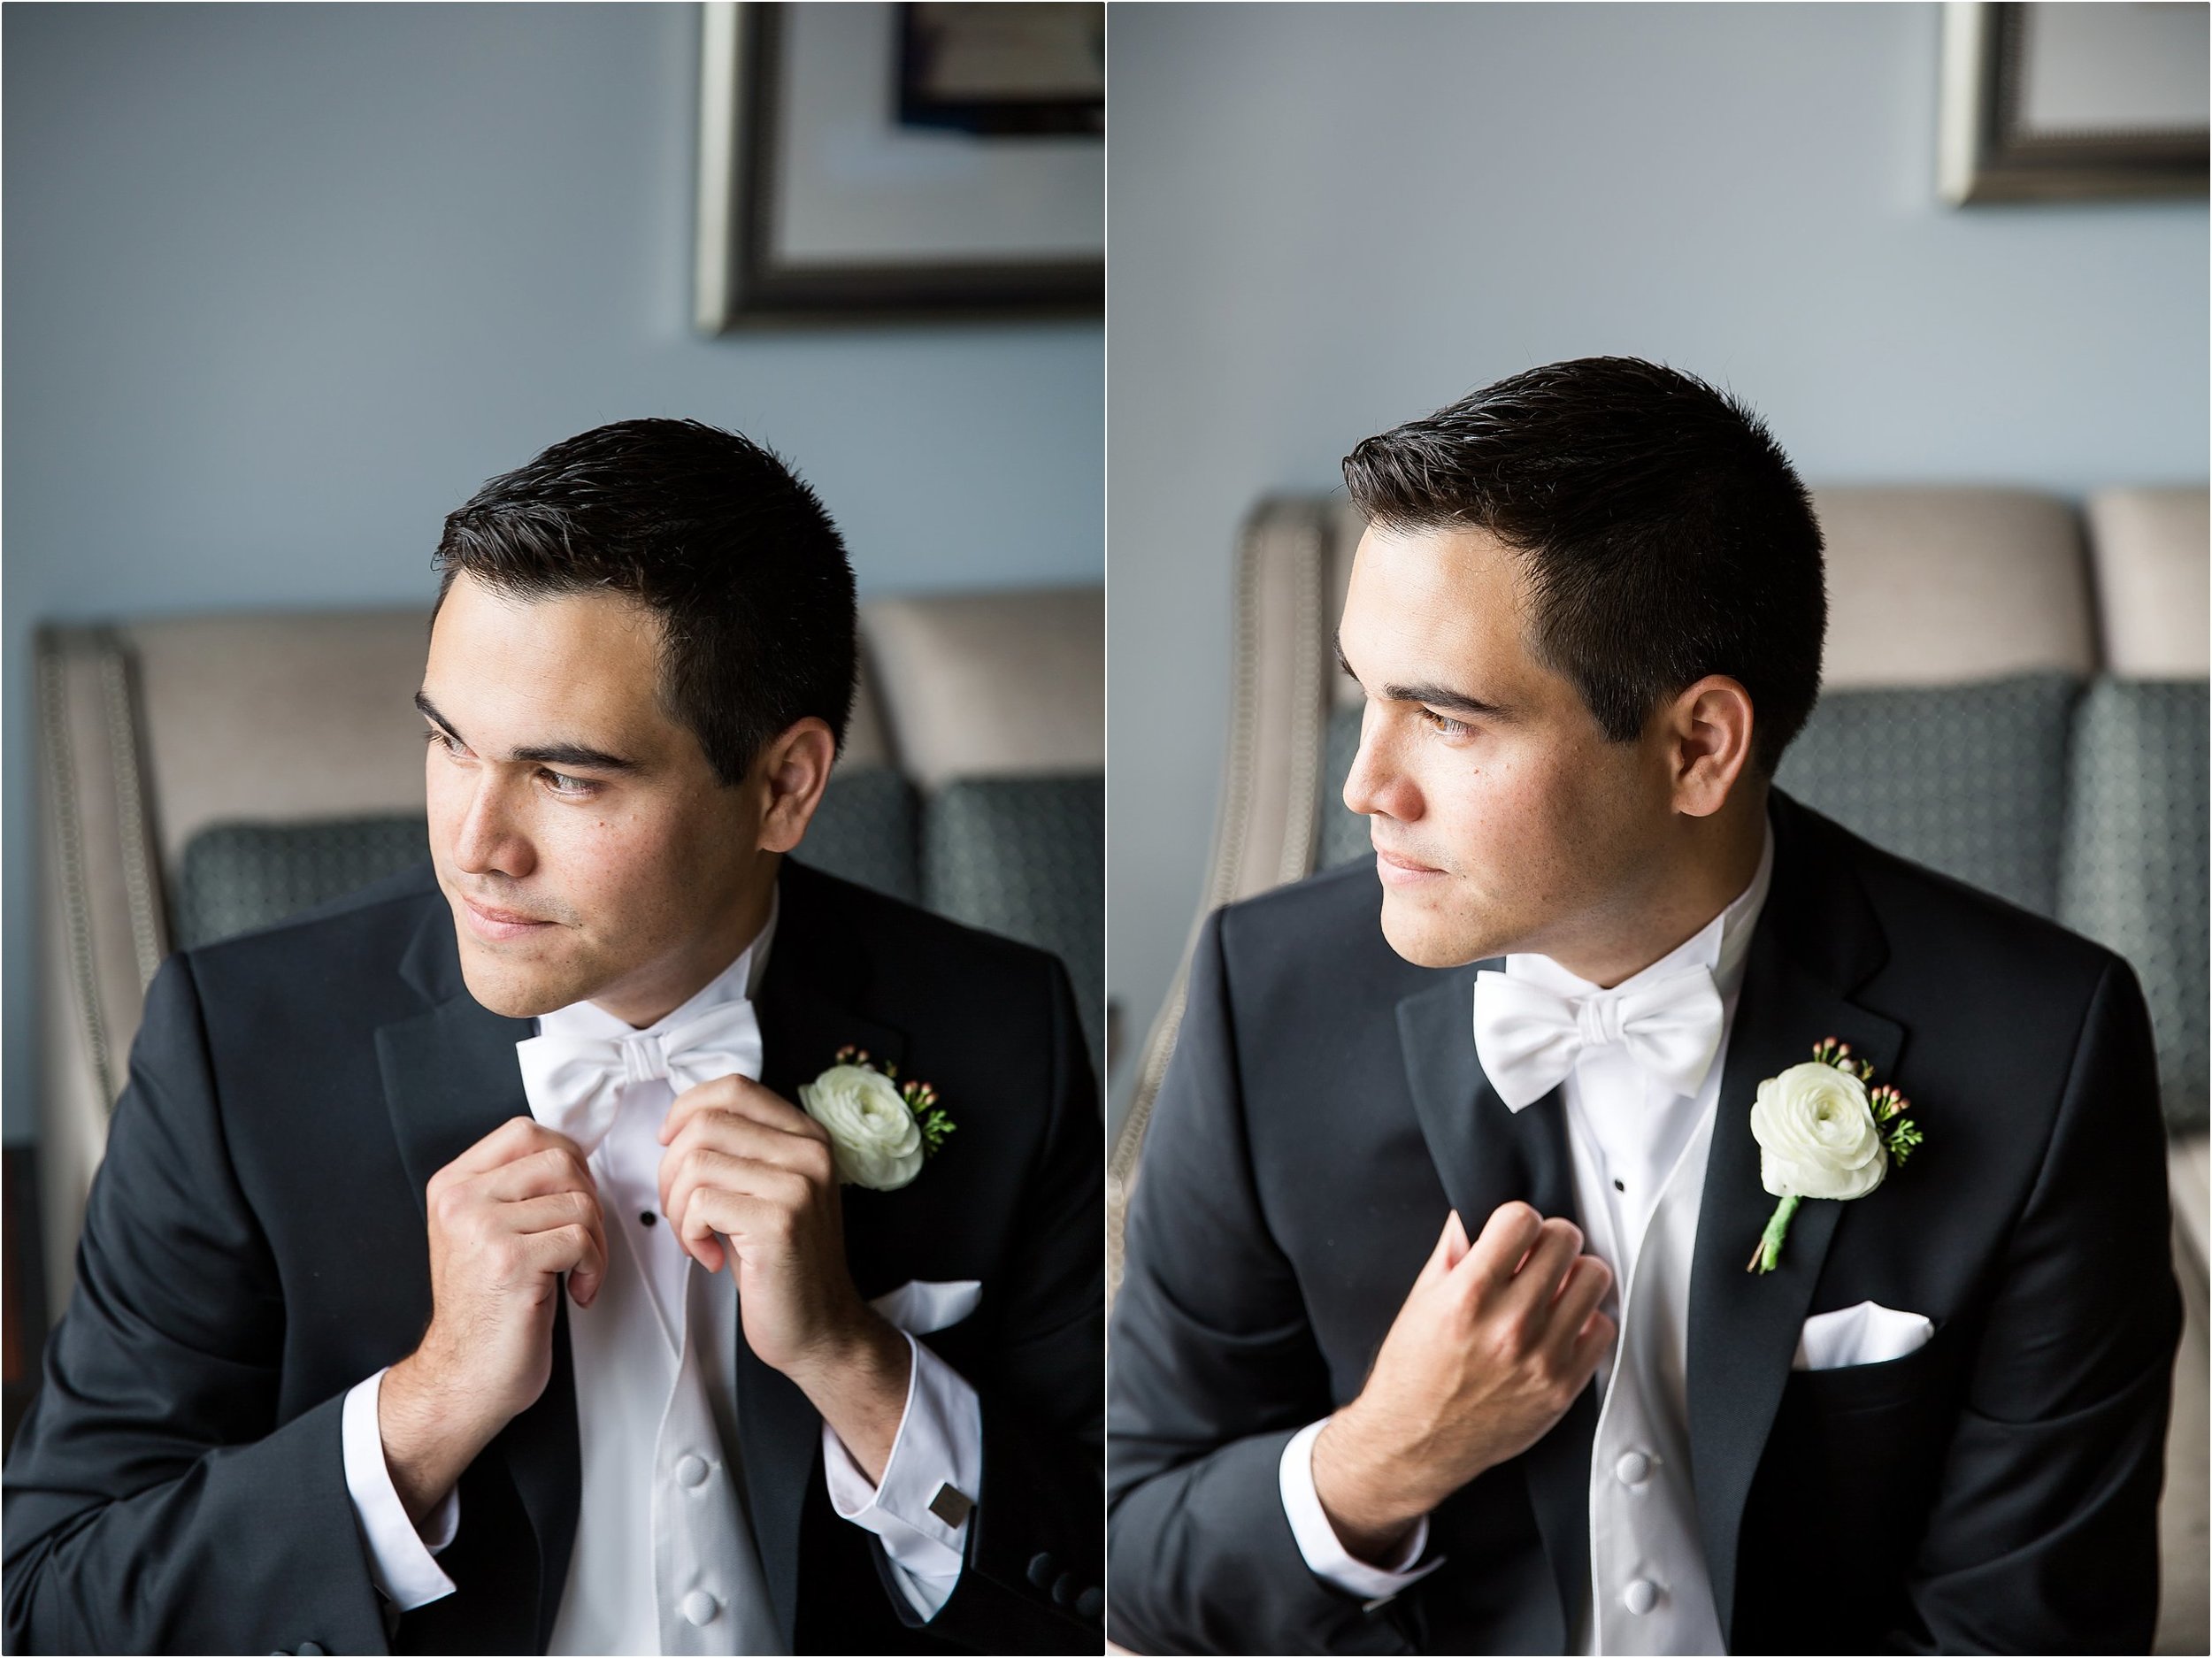 Groom getting ready portraits with ranunculus boutonniere